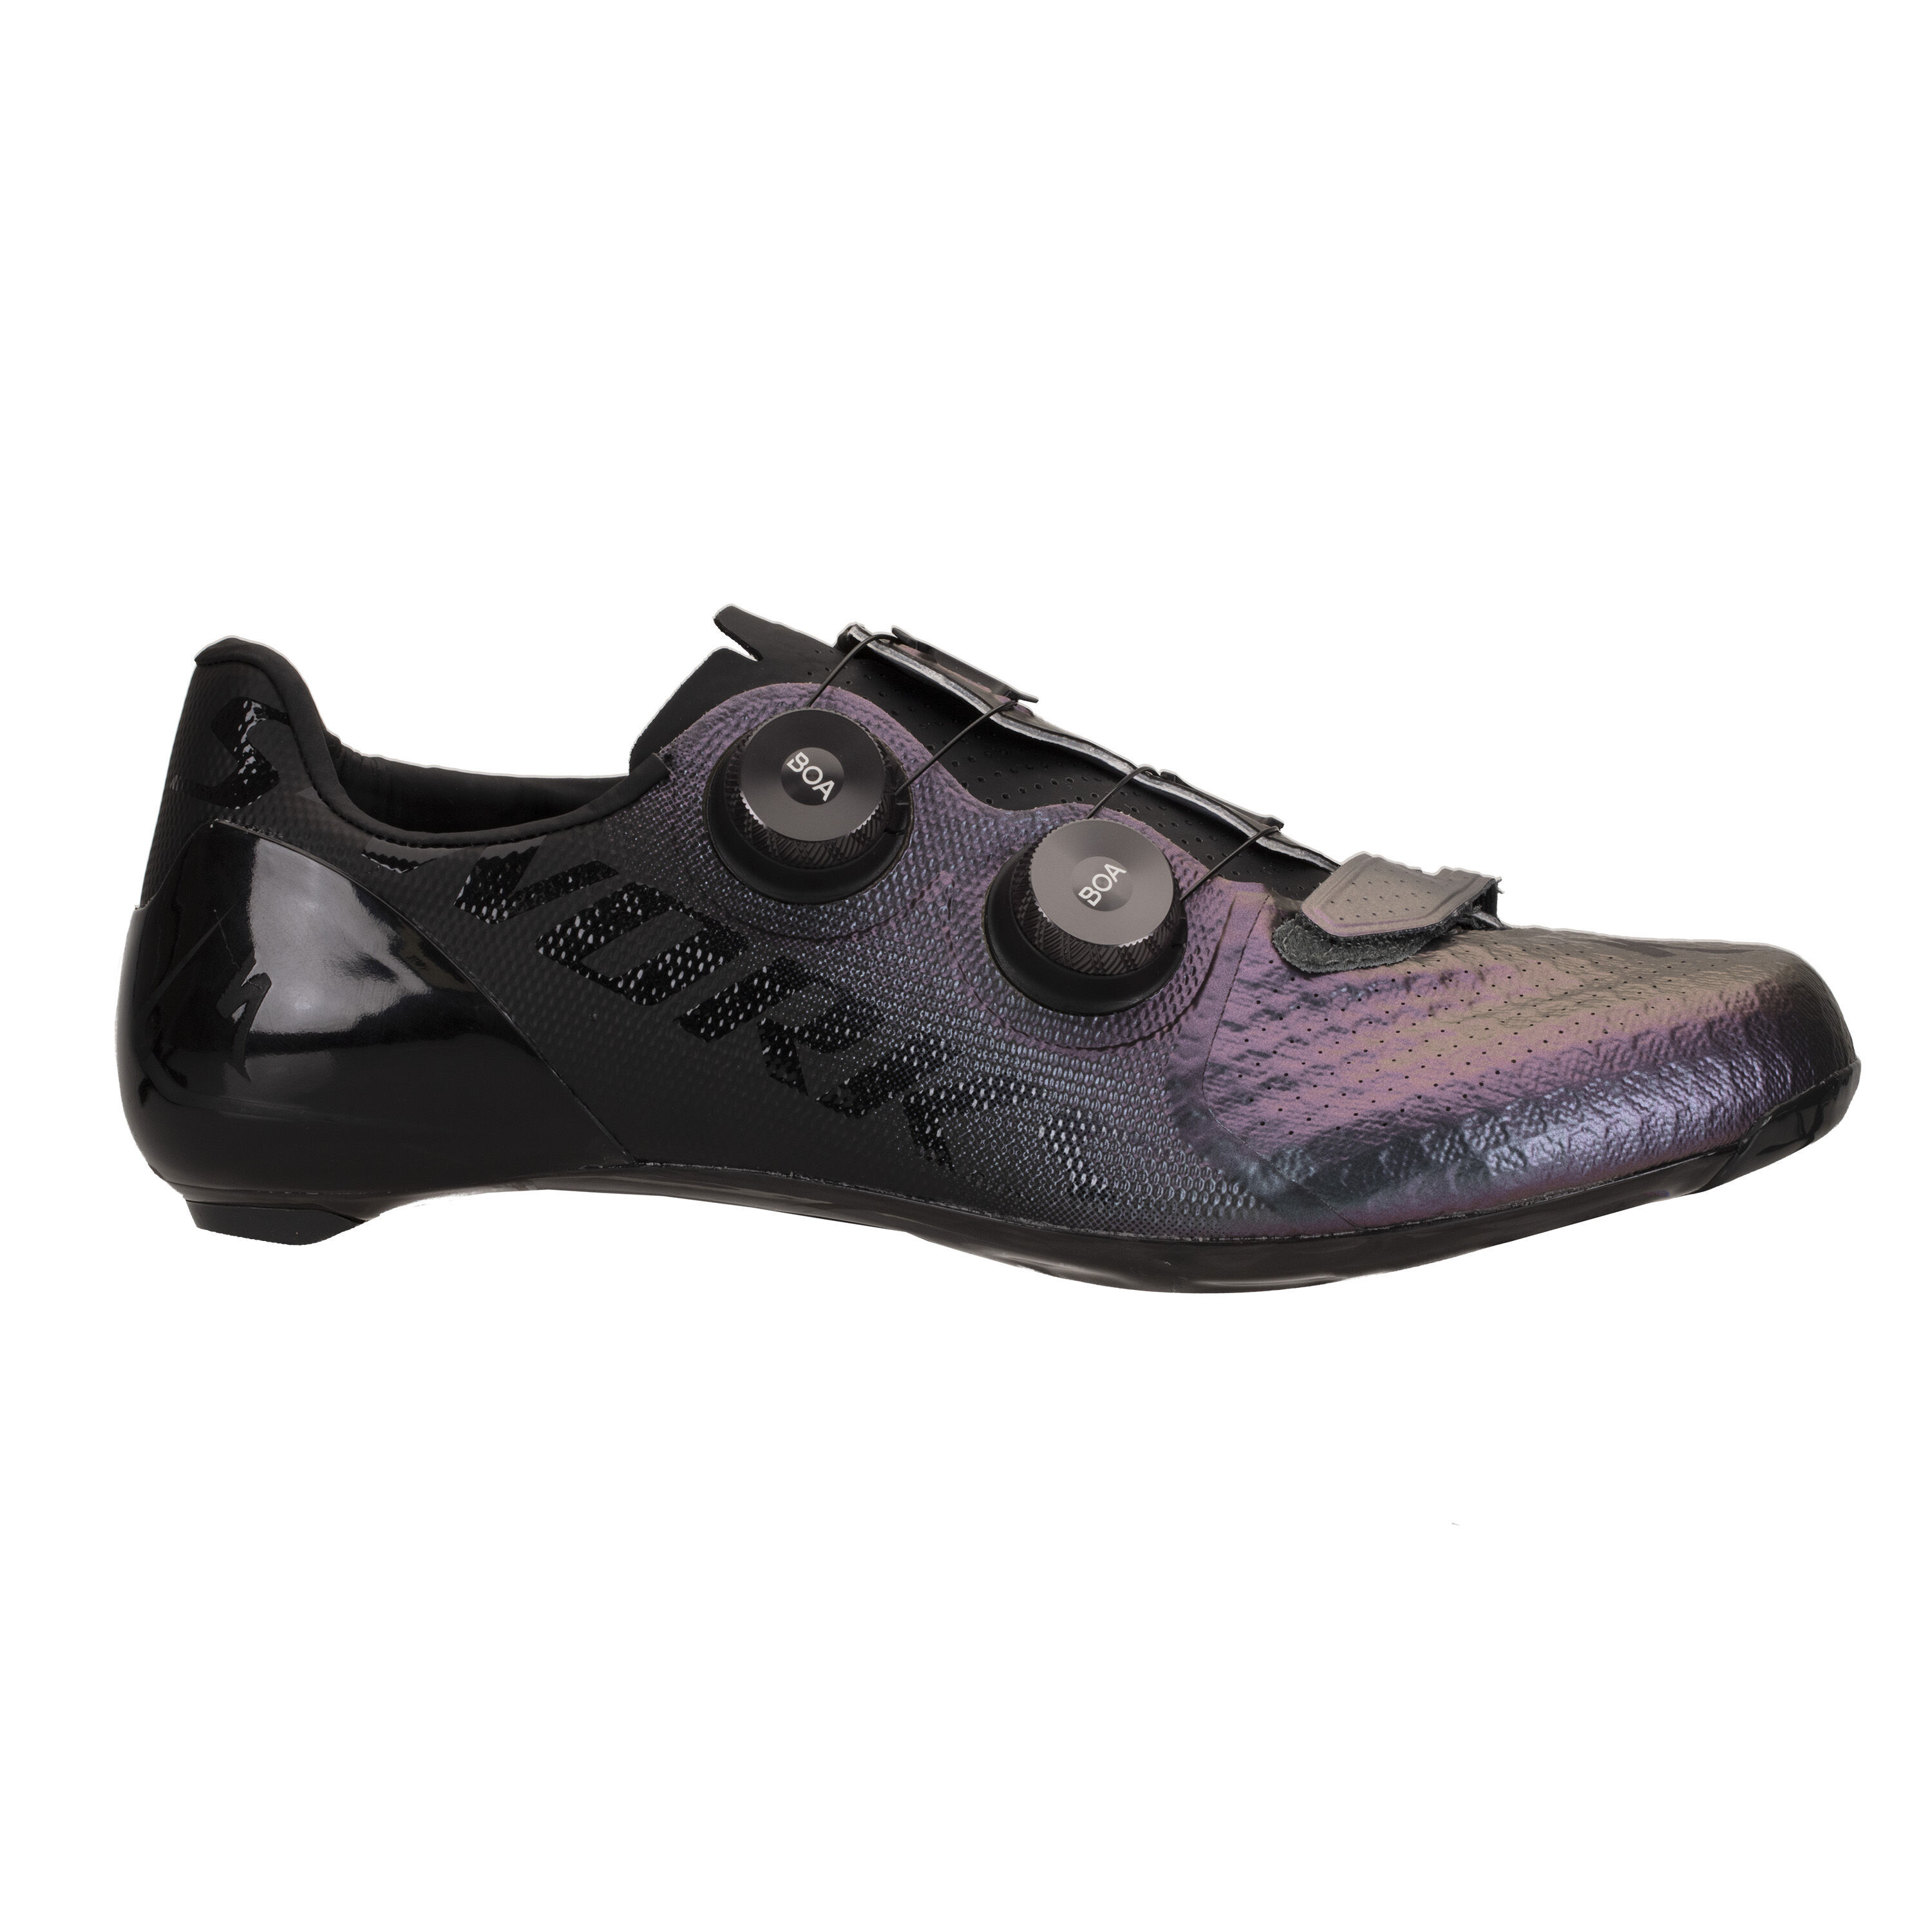 Specialized S-Works 7 Road shoes LordGun online bike store